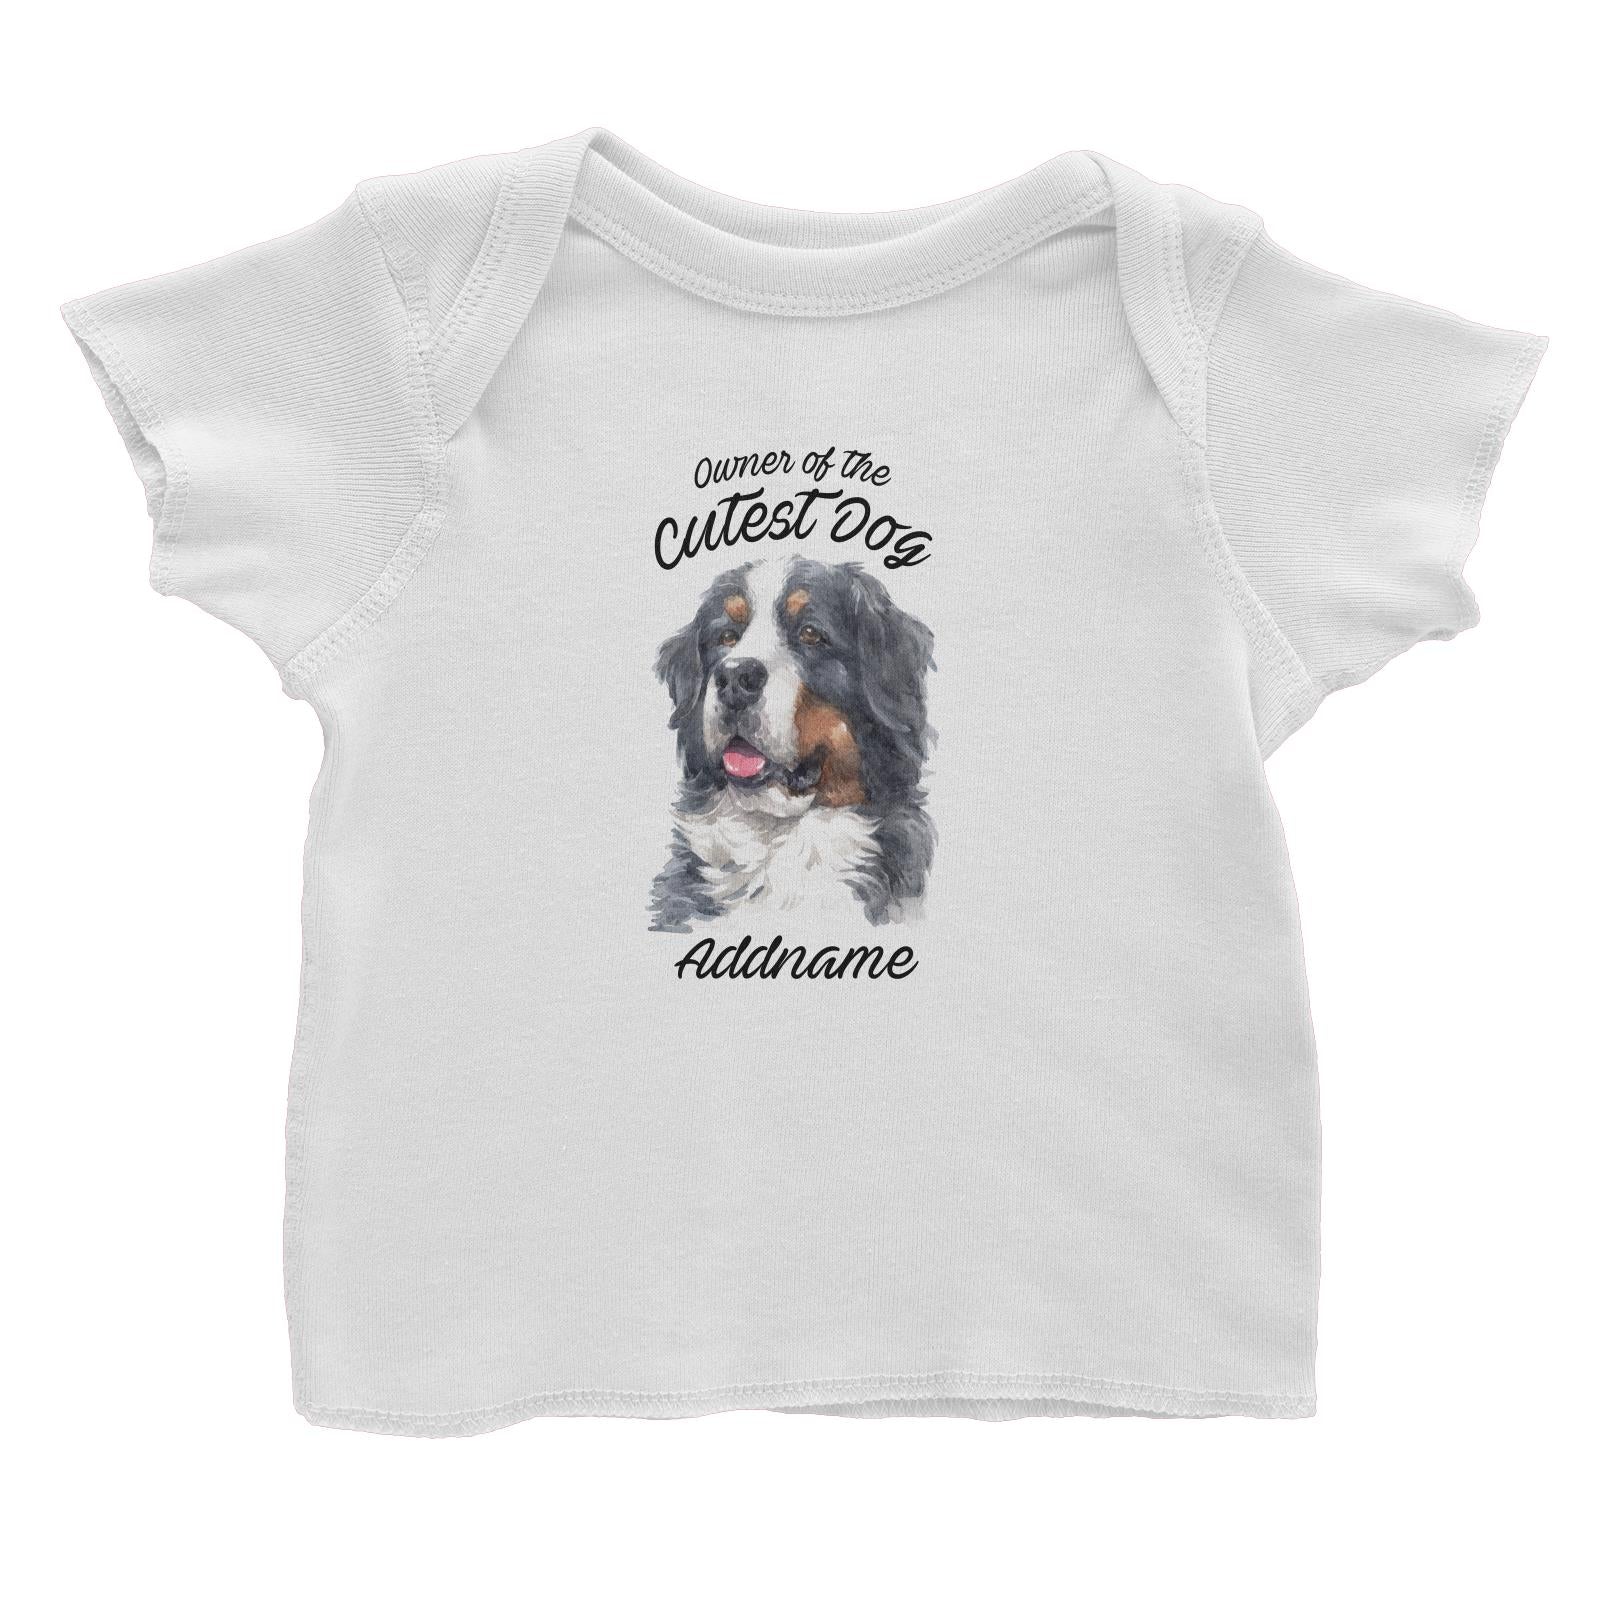 Watercolor Dog Owner Of The Cutest Dog Bernese Mountain Dog Addname Baby T-Shirt